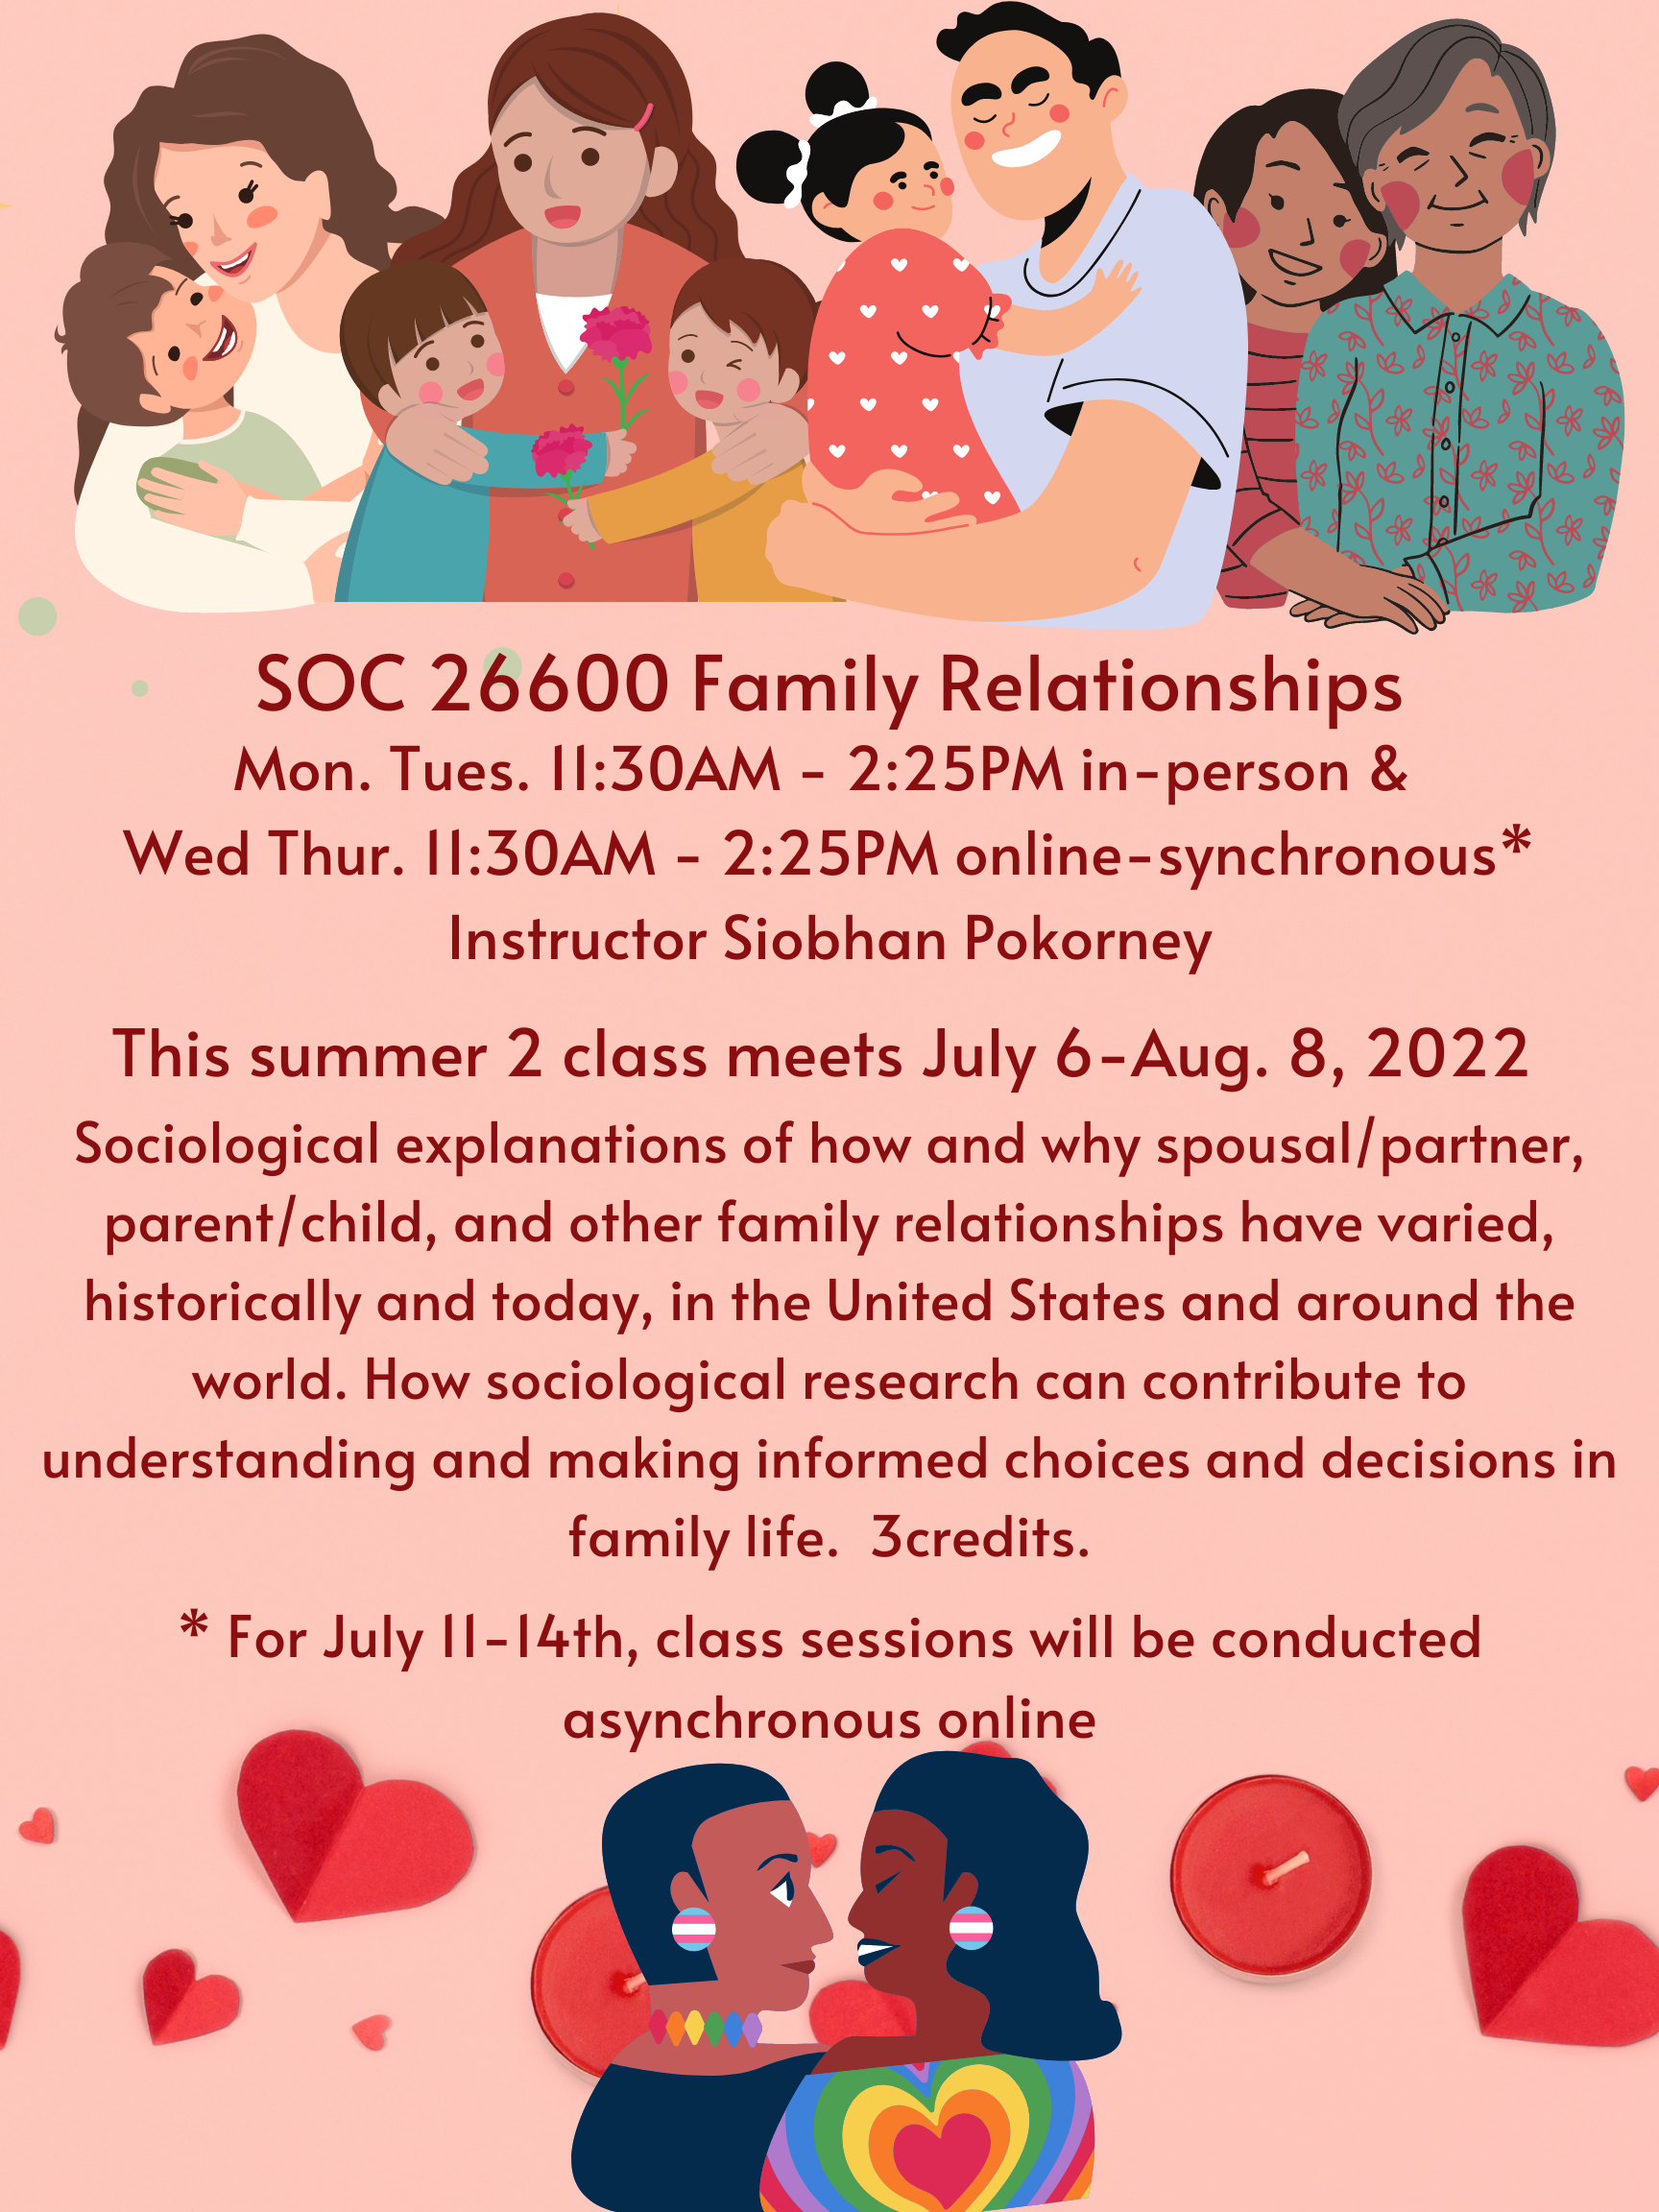 SOC 26600 Family Relationship Summer Course